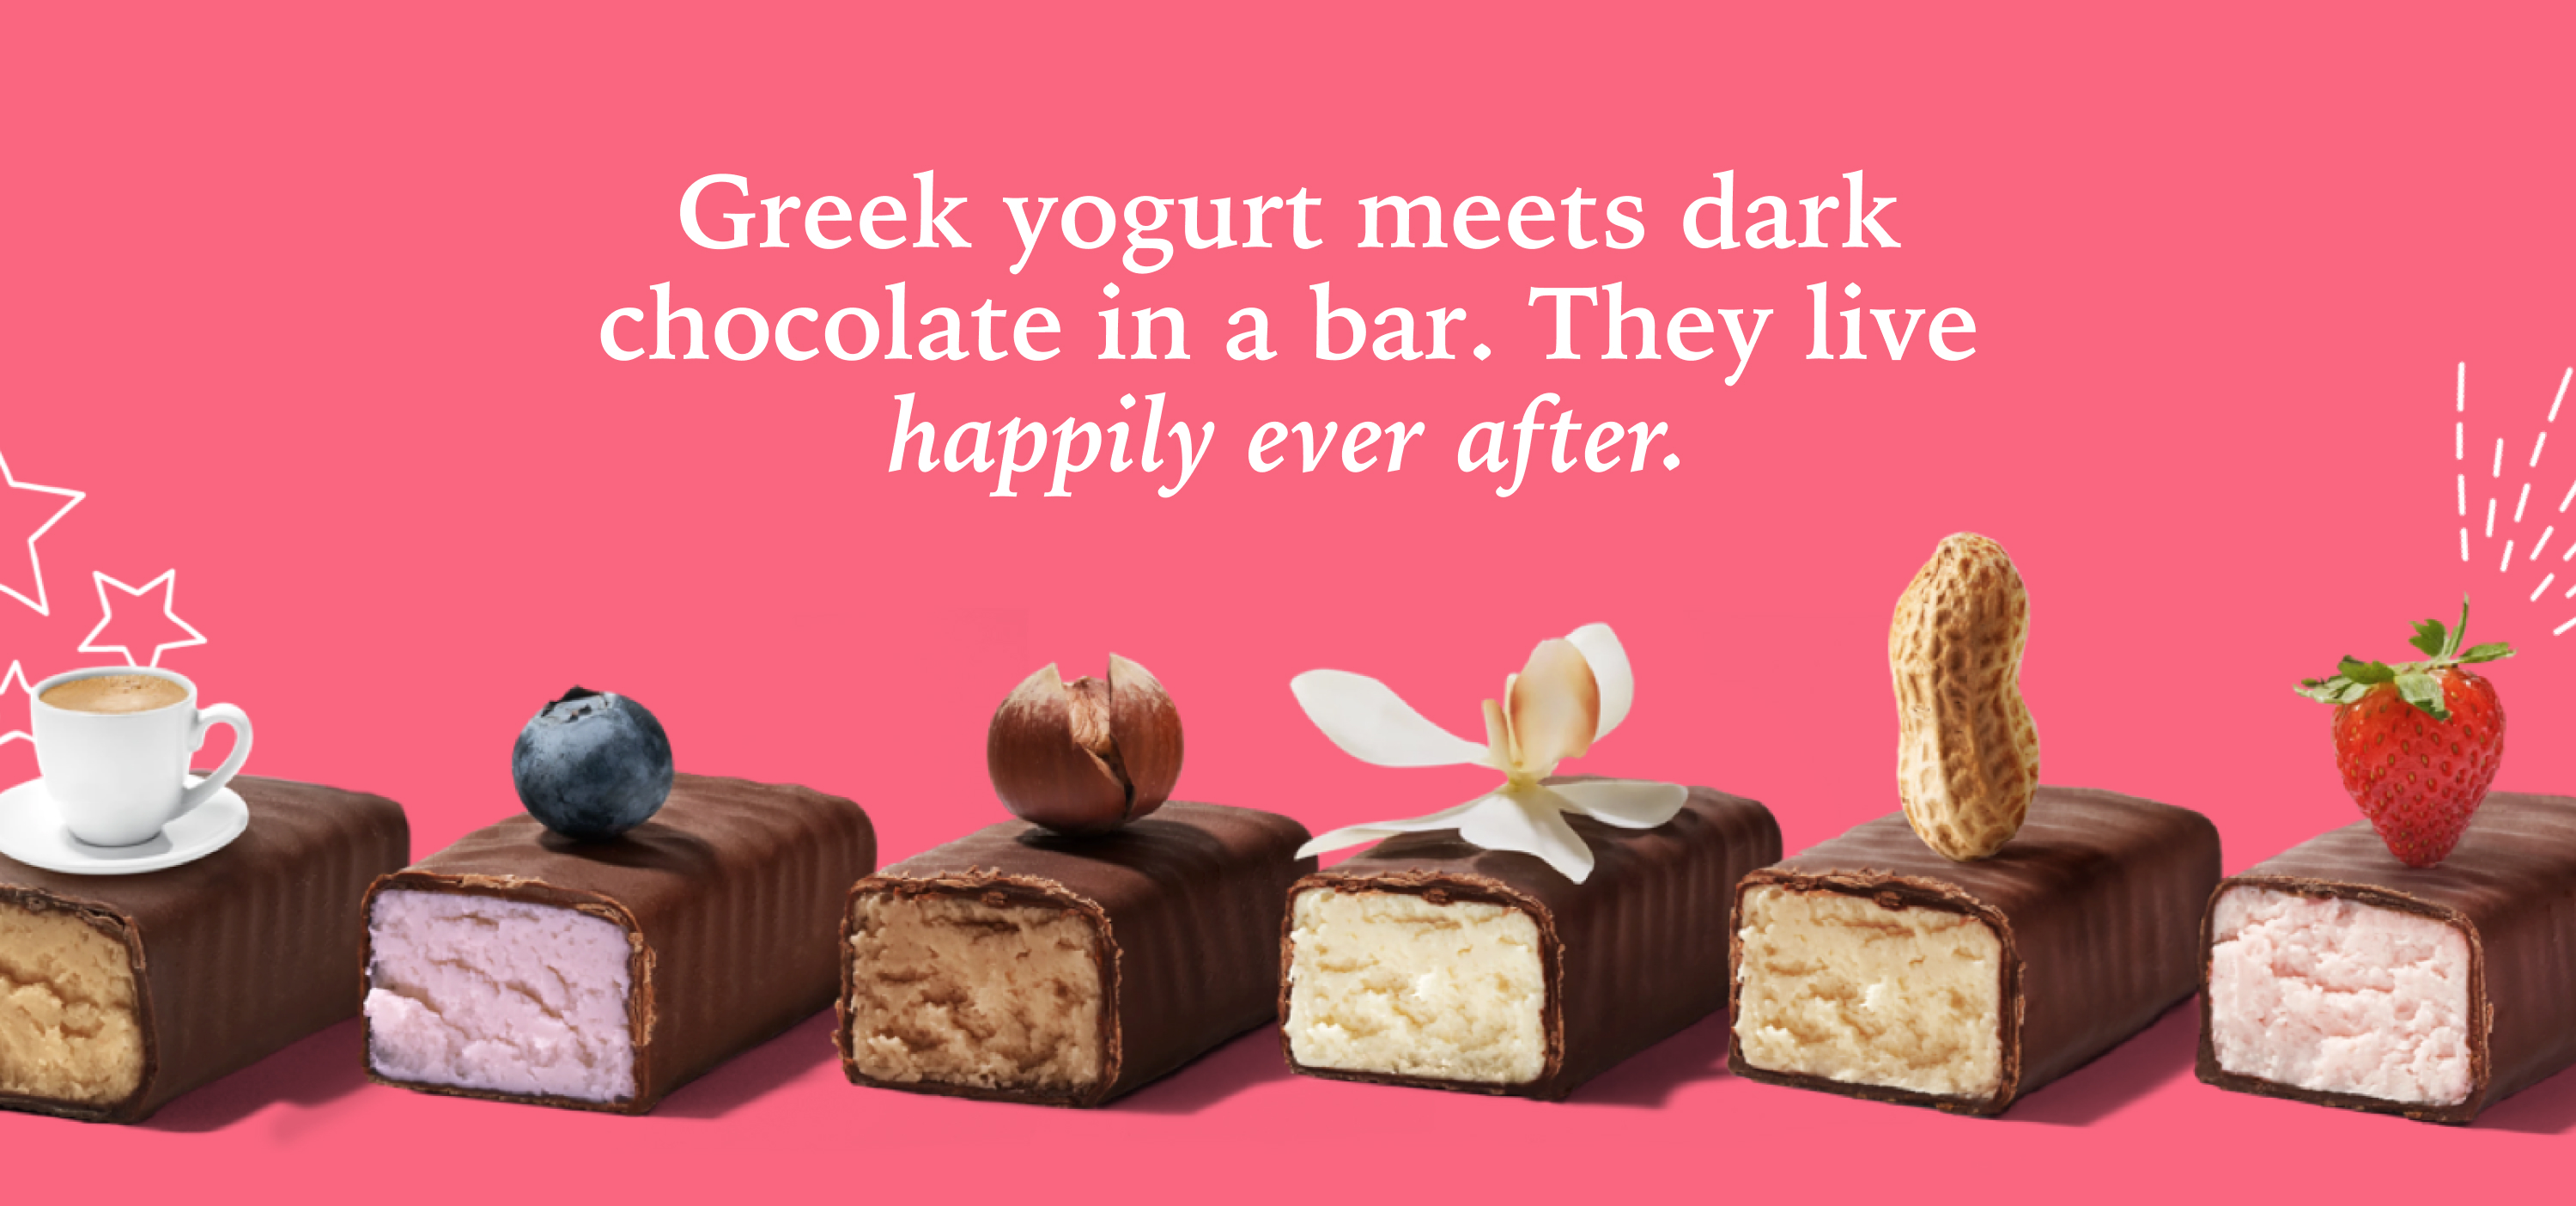 Greek yogurt meets dark chocolate in a bar. They live happily ever after.